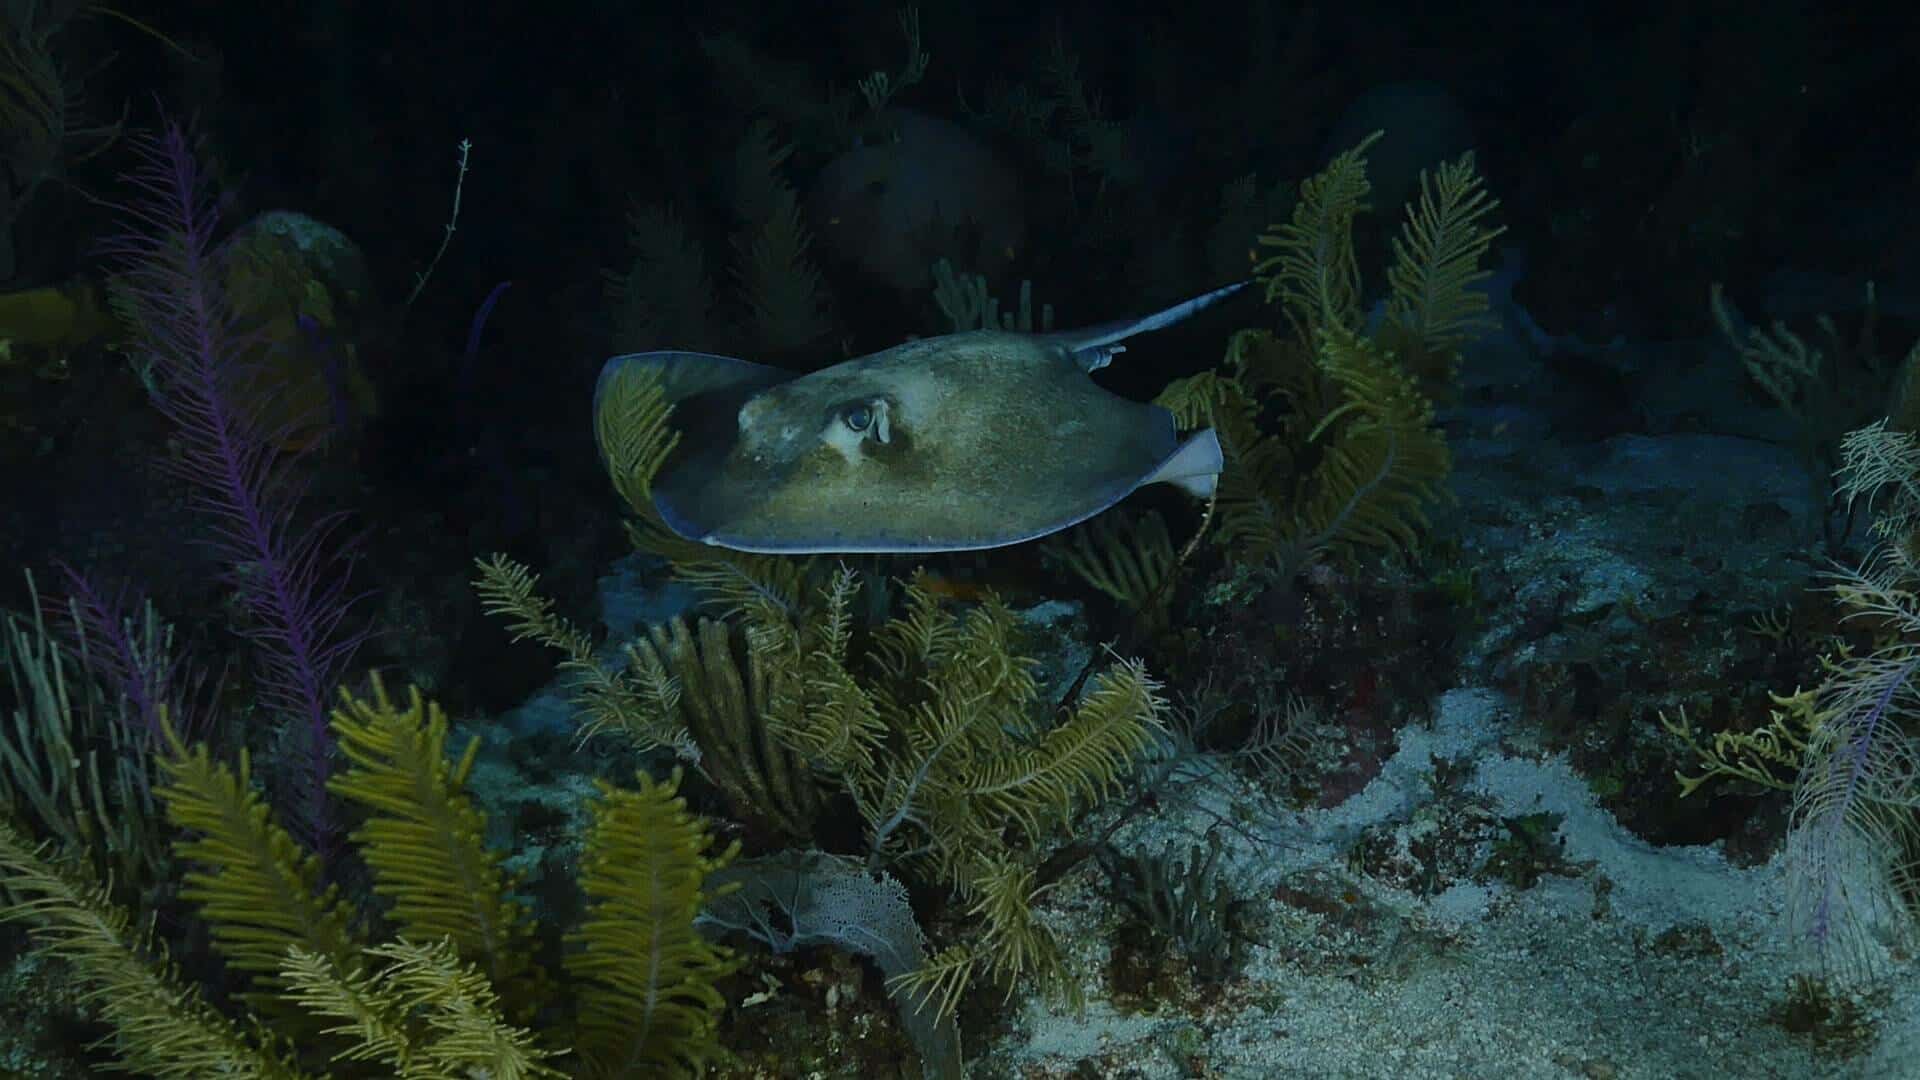 Southern sting ray hunts in the dark on night dive in Belize